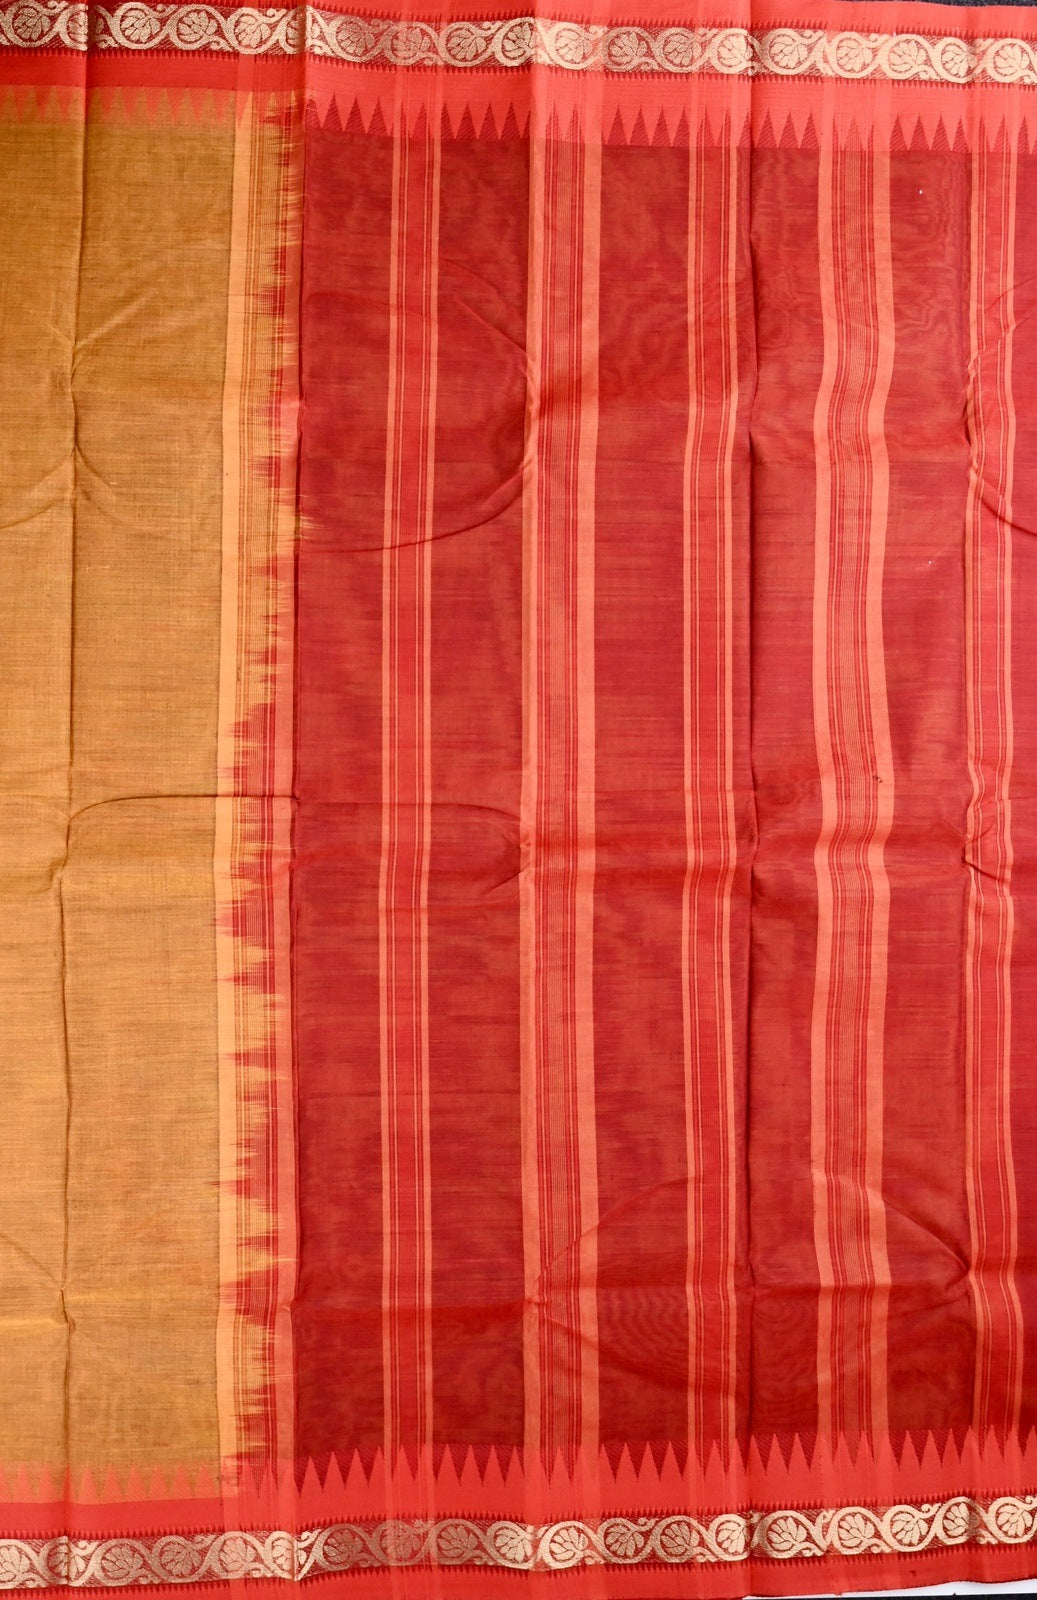 Dhaka cotton saree musturd yellow and red color with small zari border, big contrast pallu and plain blouse.